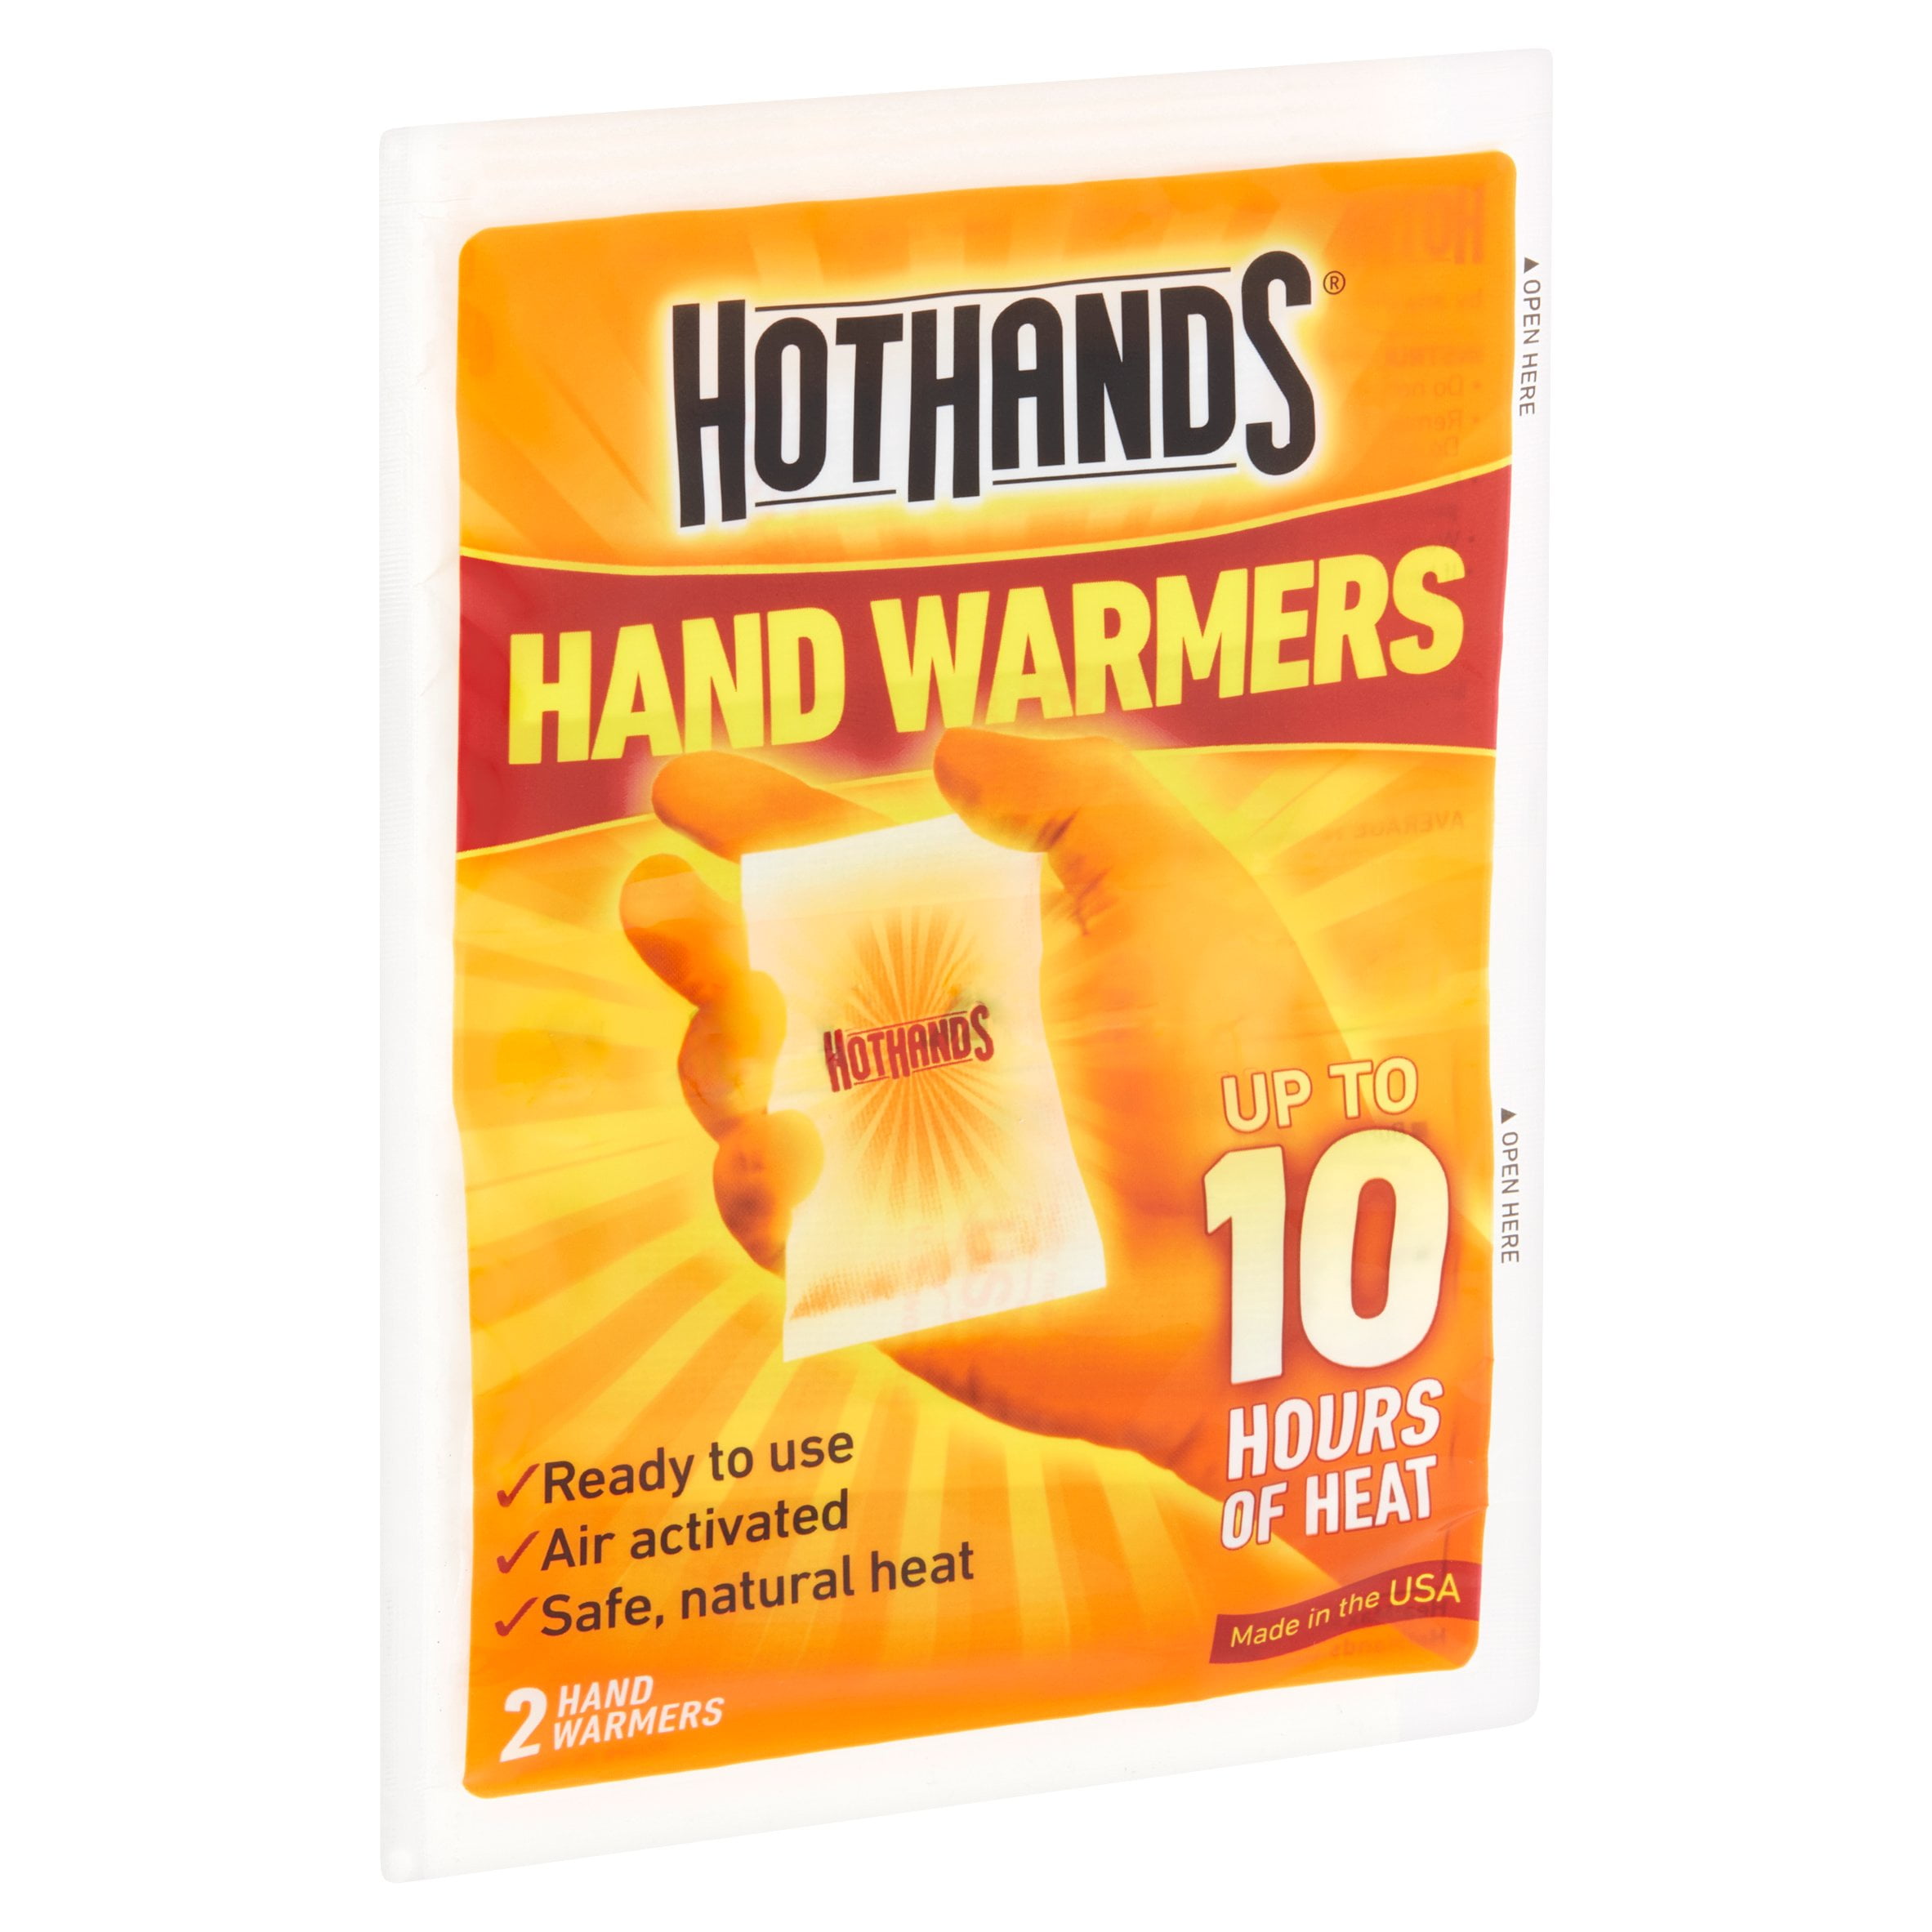 HotHands Hand Warmers 2PK Up to 10 Hours of Heat Easy Safe Air Activated 